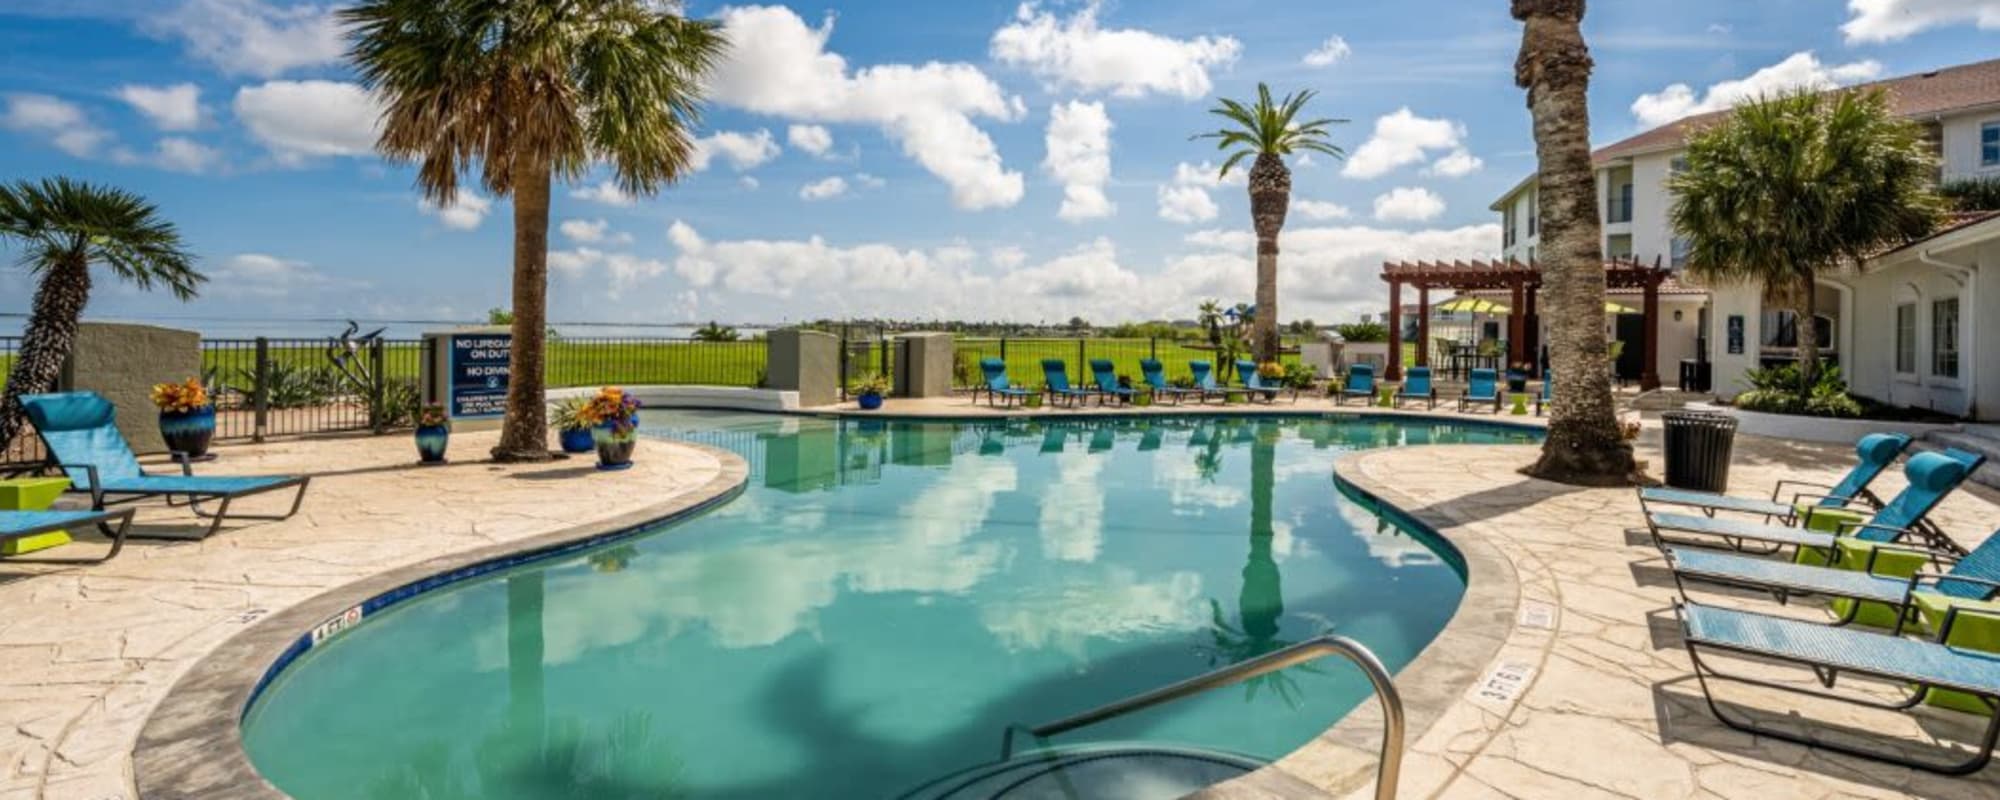 Pool area at Baypoint Apartments in Corpus Christi, Texas 